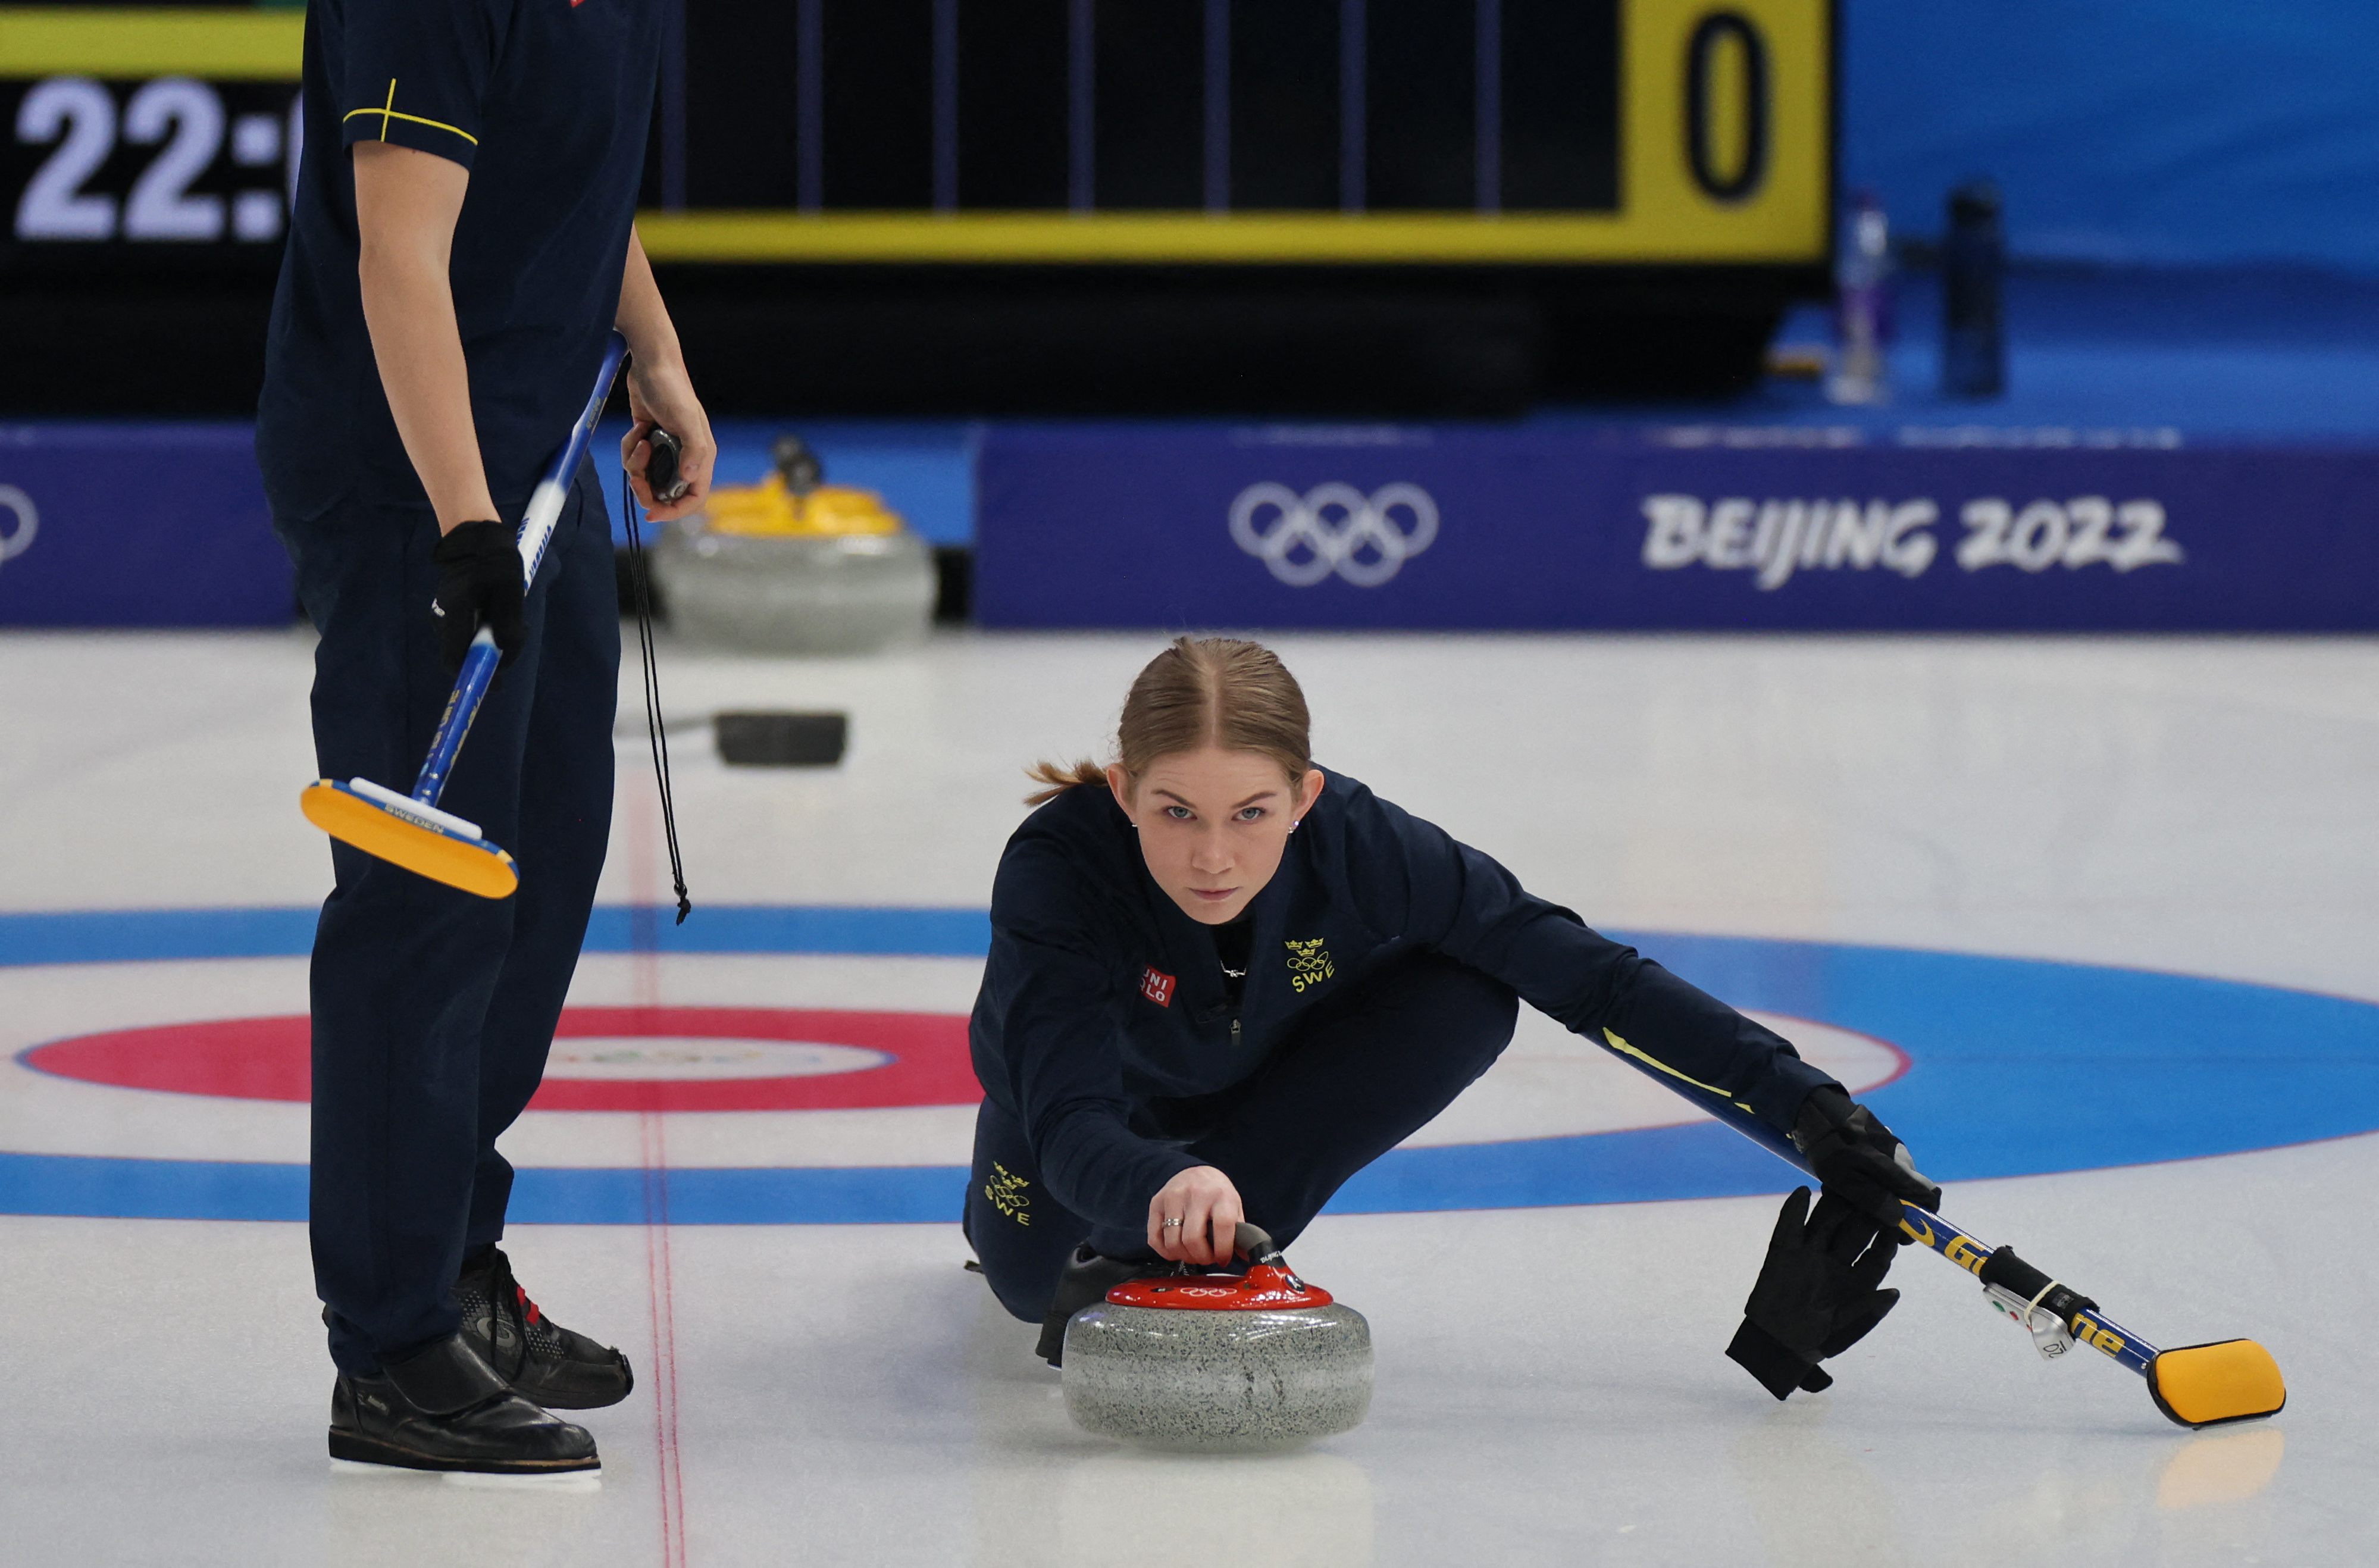 Curling - Mixed Doubles Round Robin Session 1 - Sweden v Britain